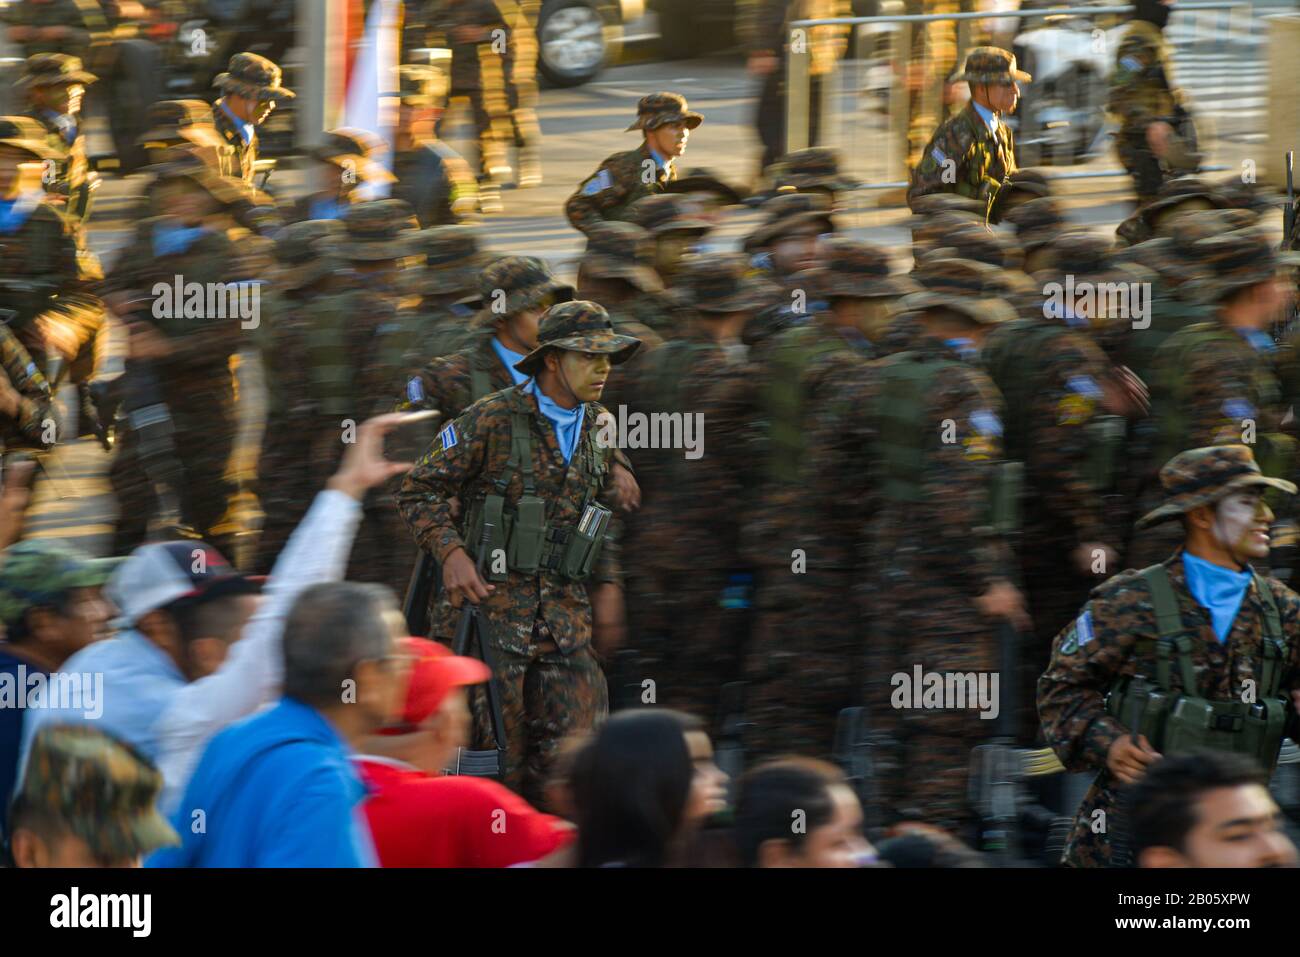 San Salvador, El Salvador. 18th Feb, 2020. Soldiers lineup for the arrival of the President of El Salvador.1400 troops where incorporated by President of El Salvador Nayib Bukele to El SalvadorÂ´s security plan ''Territorial Control''. This incorporation happens just nine days after Bukele busted into congress with the help of military to pressure lawmakers to approve a loan. Credit: Camilo Freedman/ZUMA Wire/Alamy Live News Stock Photo